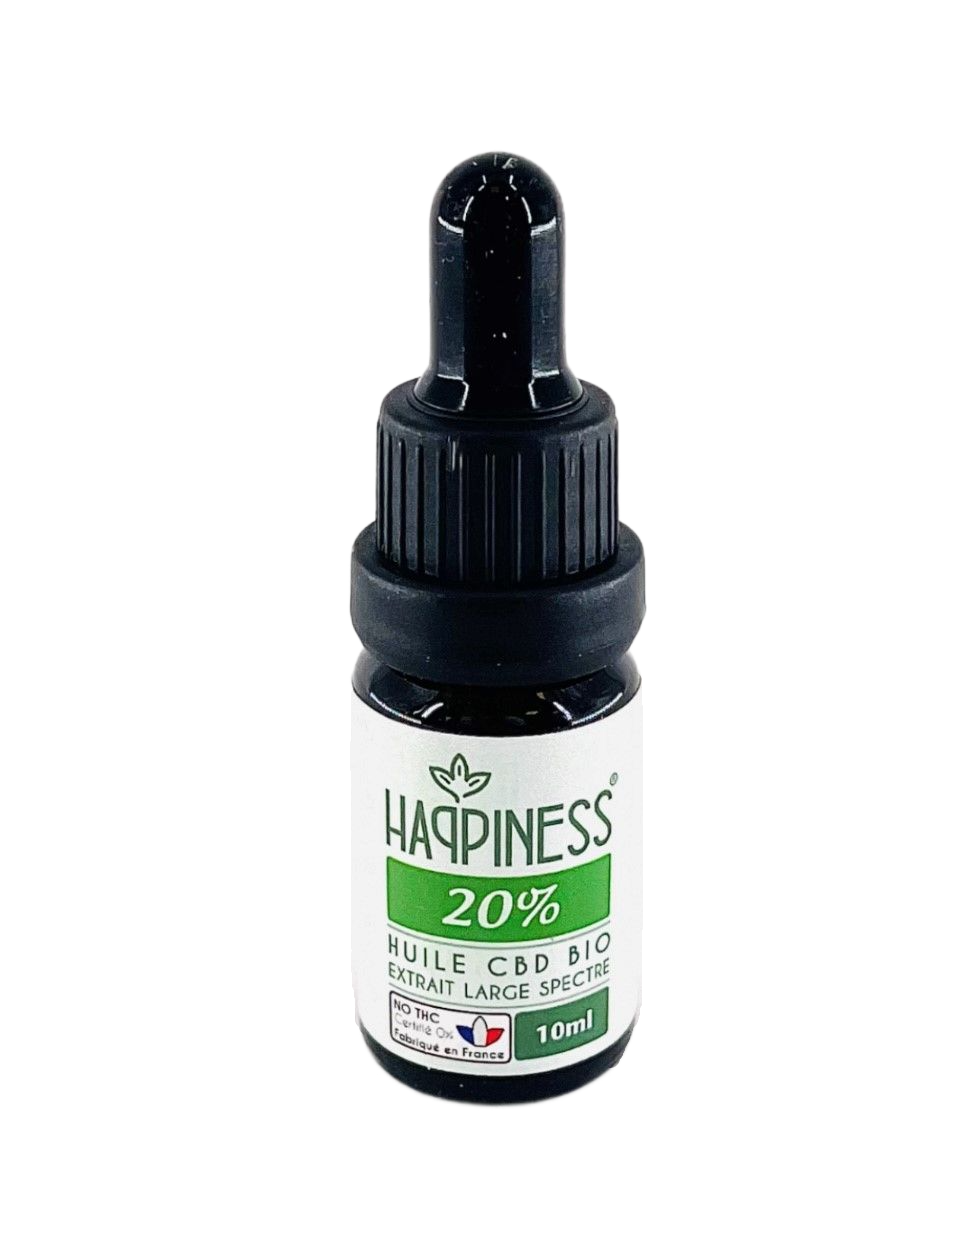 Happiness Huile CBD 20% Images